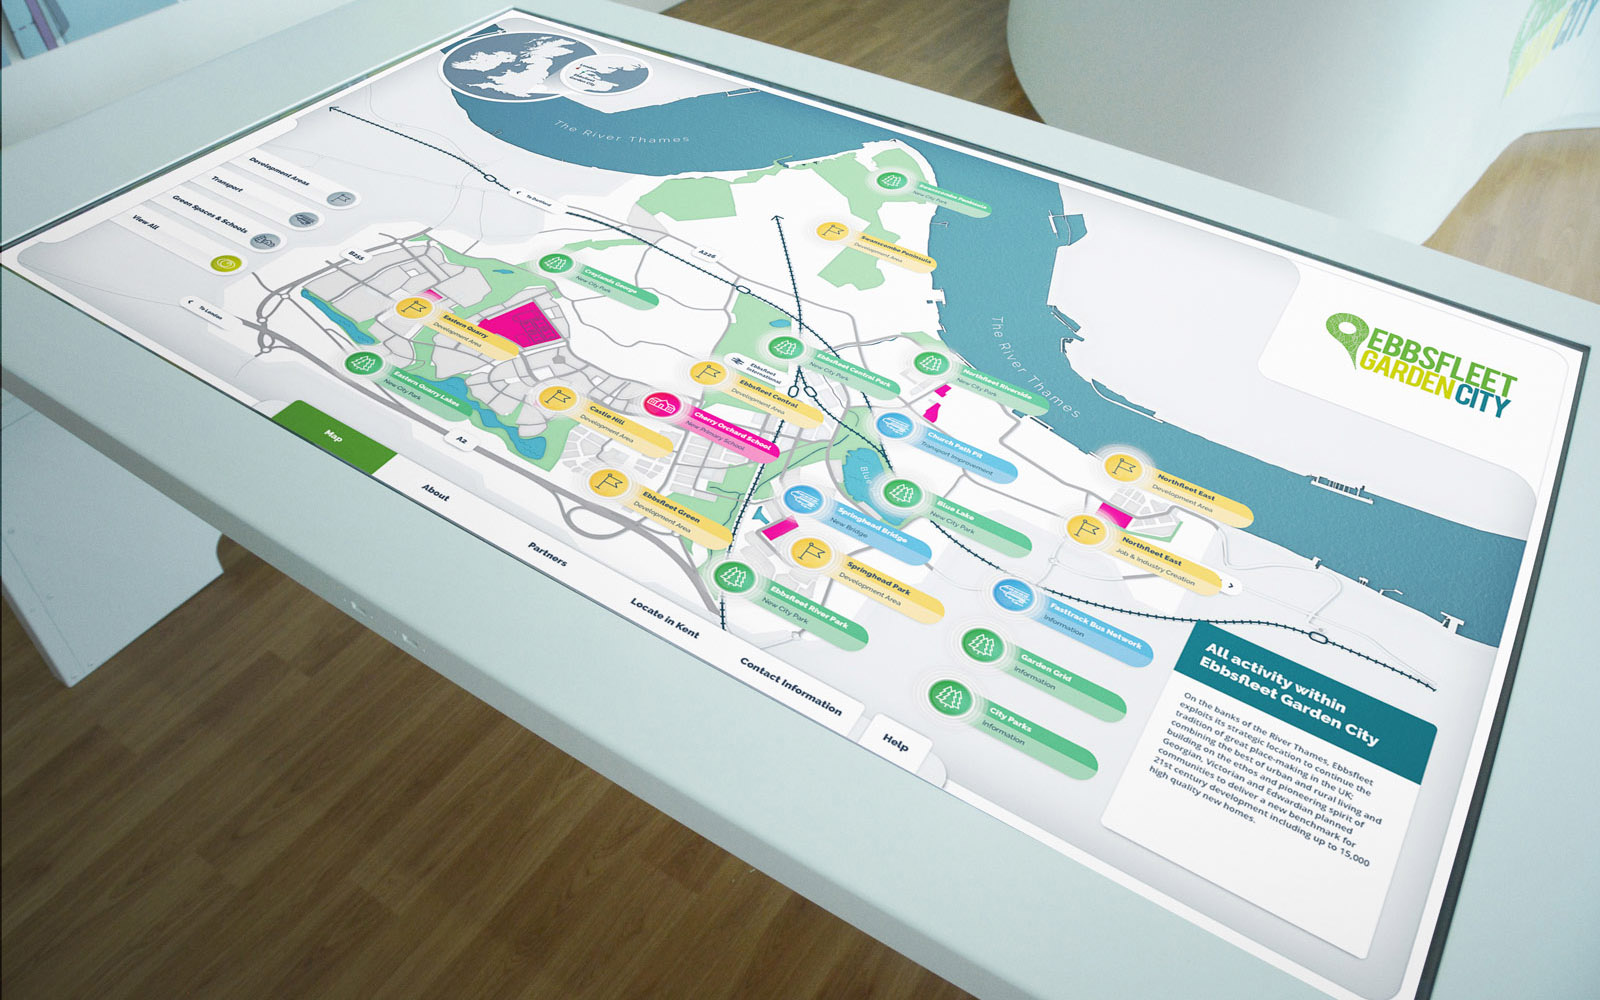 Ebbsfleet interactive map displayed on large touchscreen white monitor